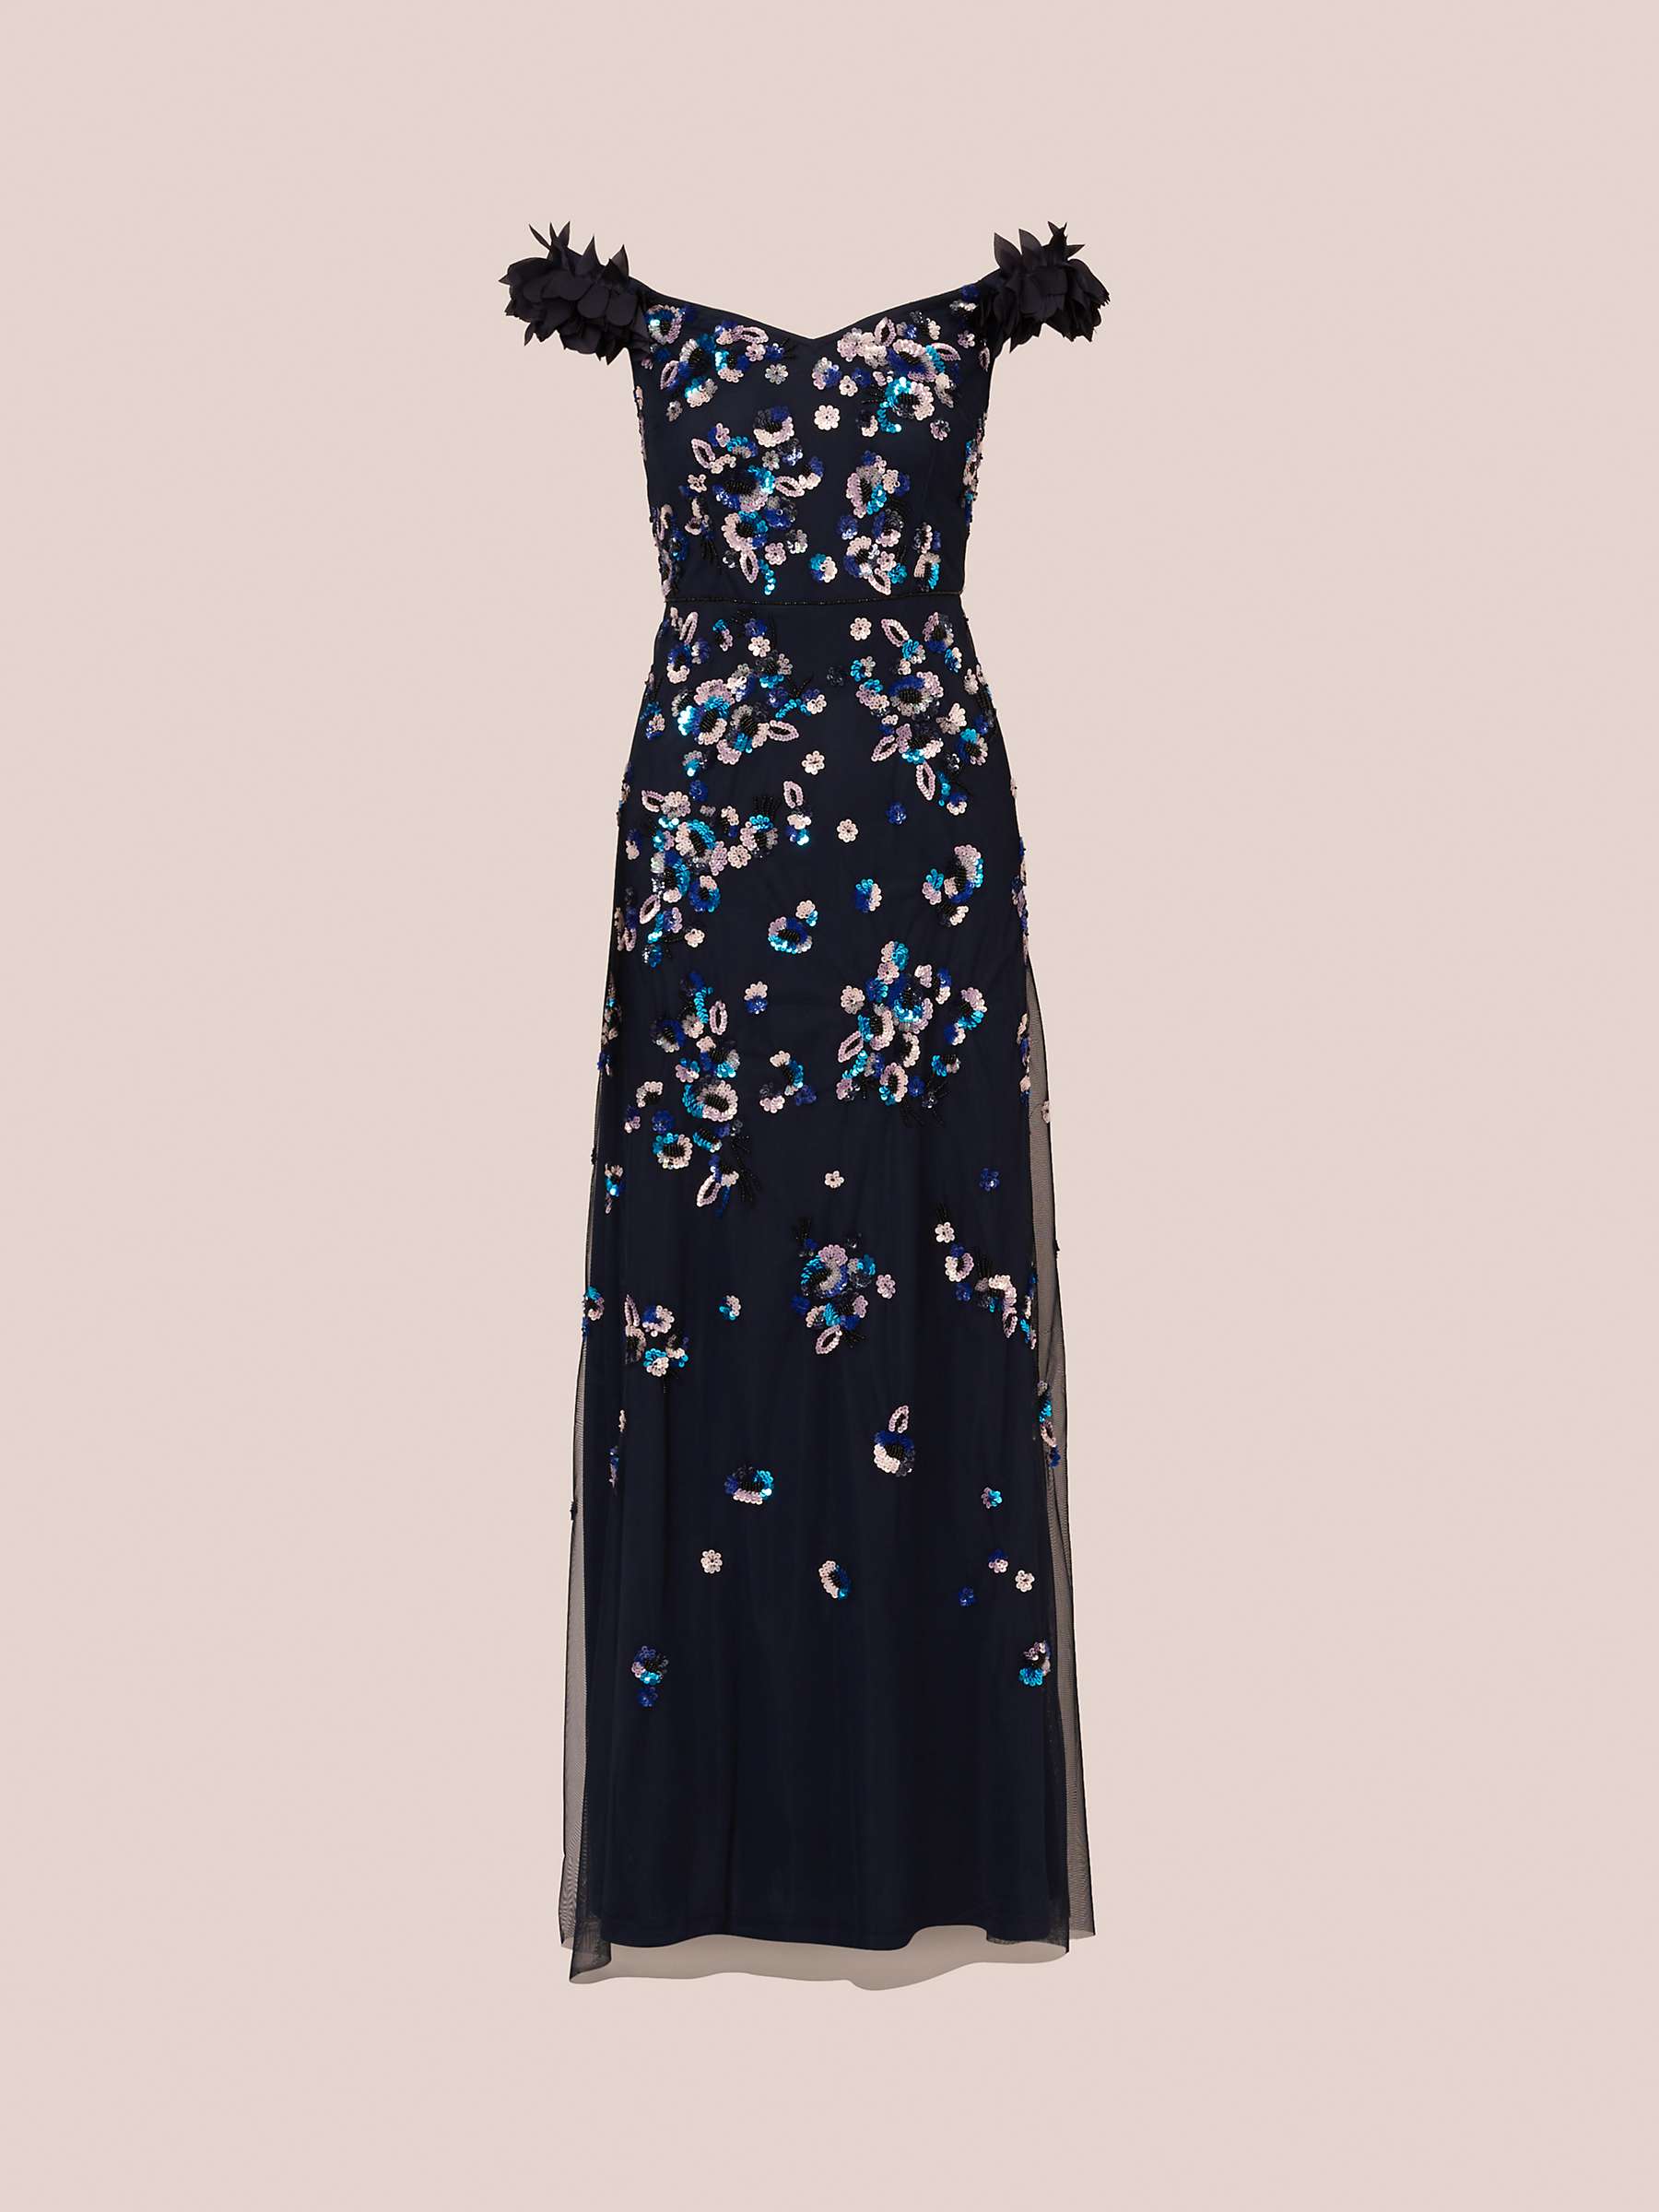 Buy Adrianna Papell Off Shoulder Beaded Maxi Dress, Midnight/Multi Online at johnlewis.com